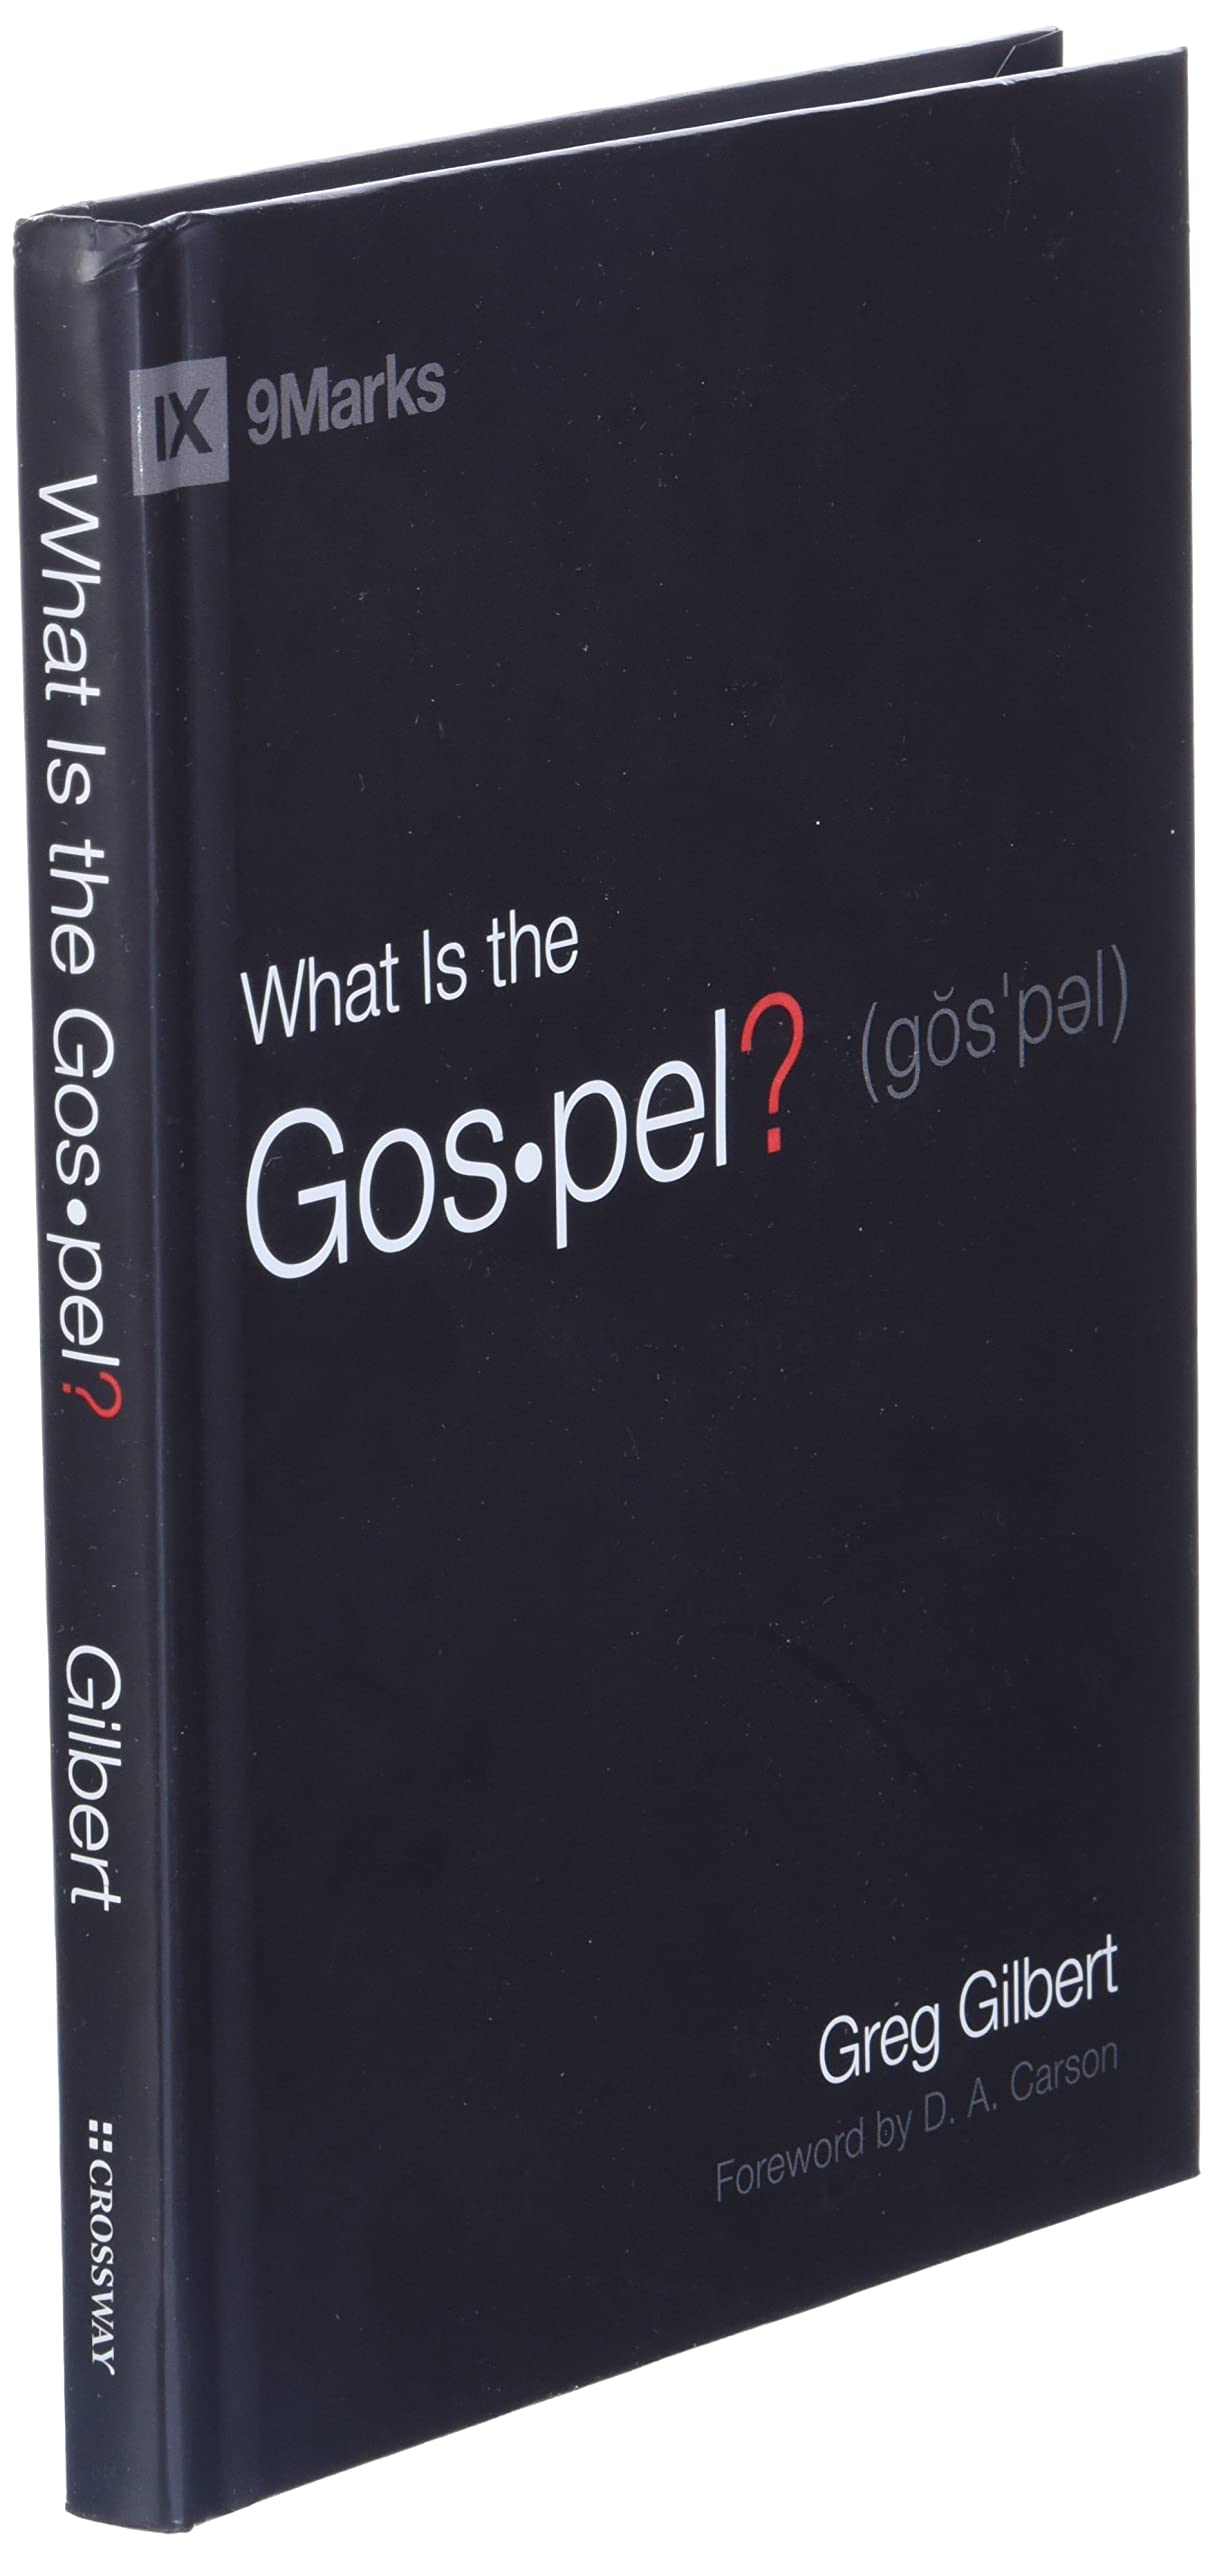 What-Is-the-Gospel-9Marks